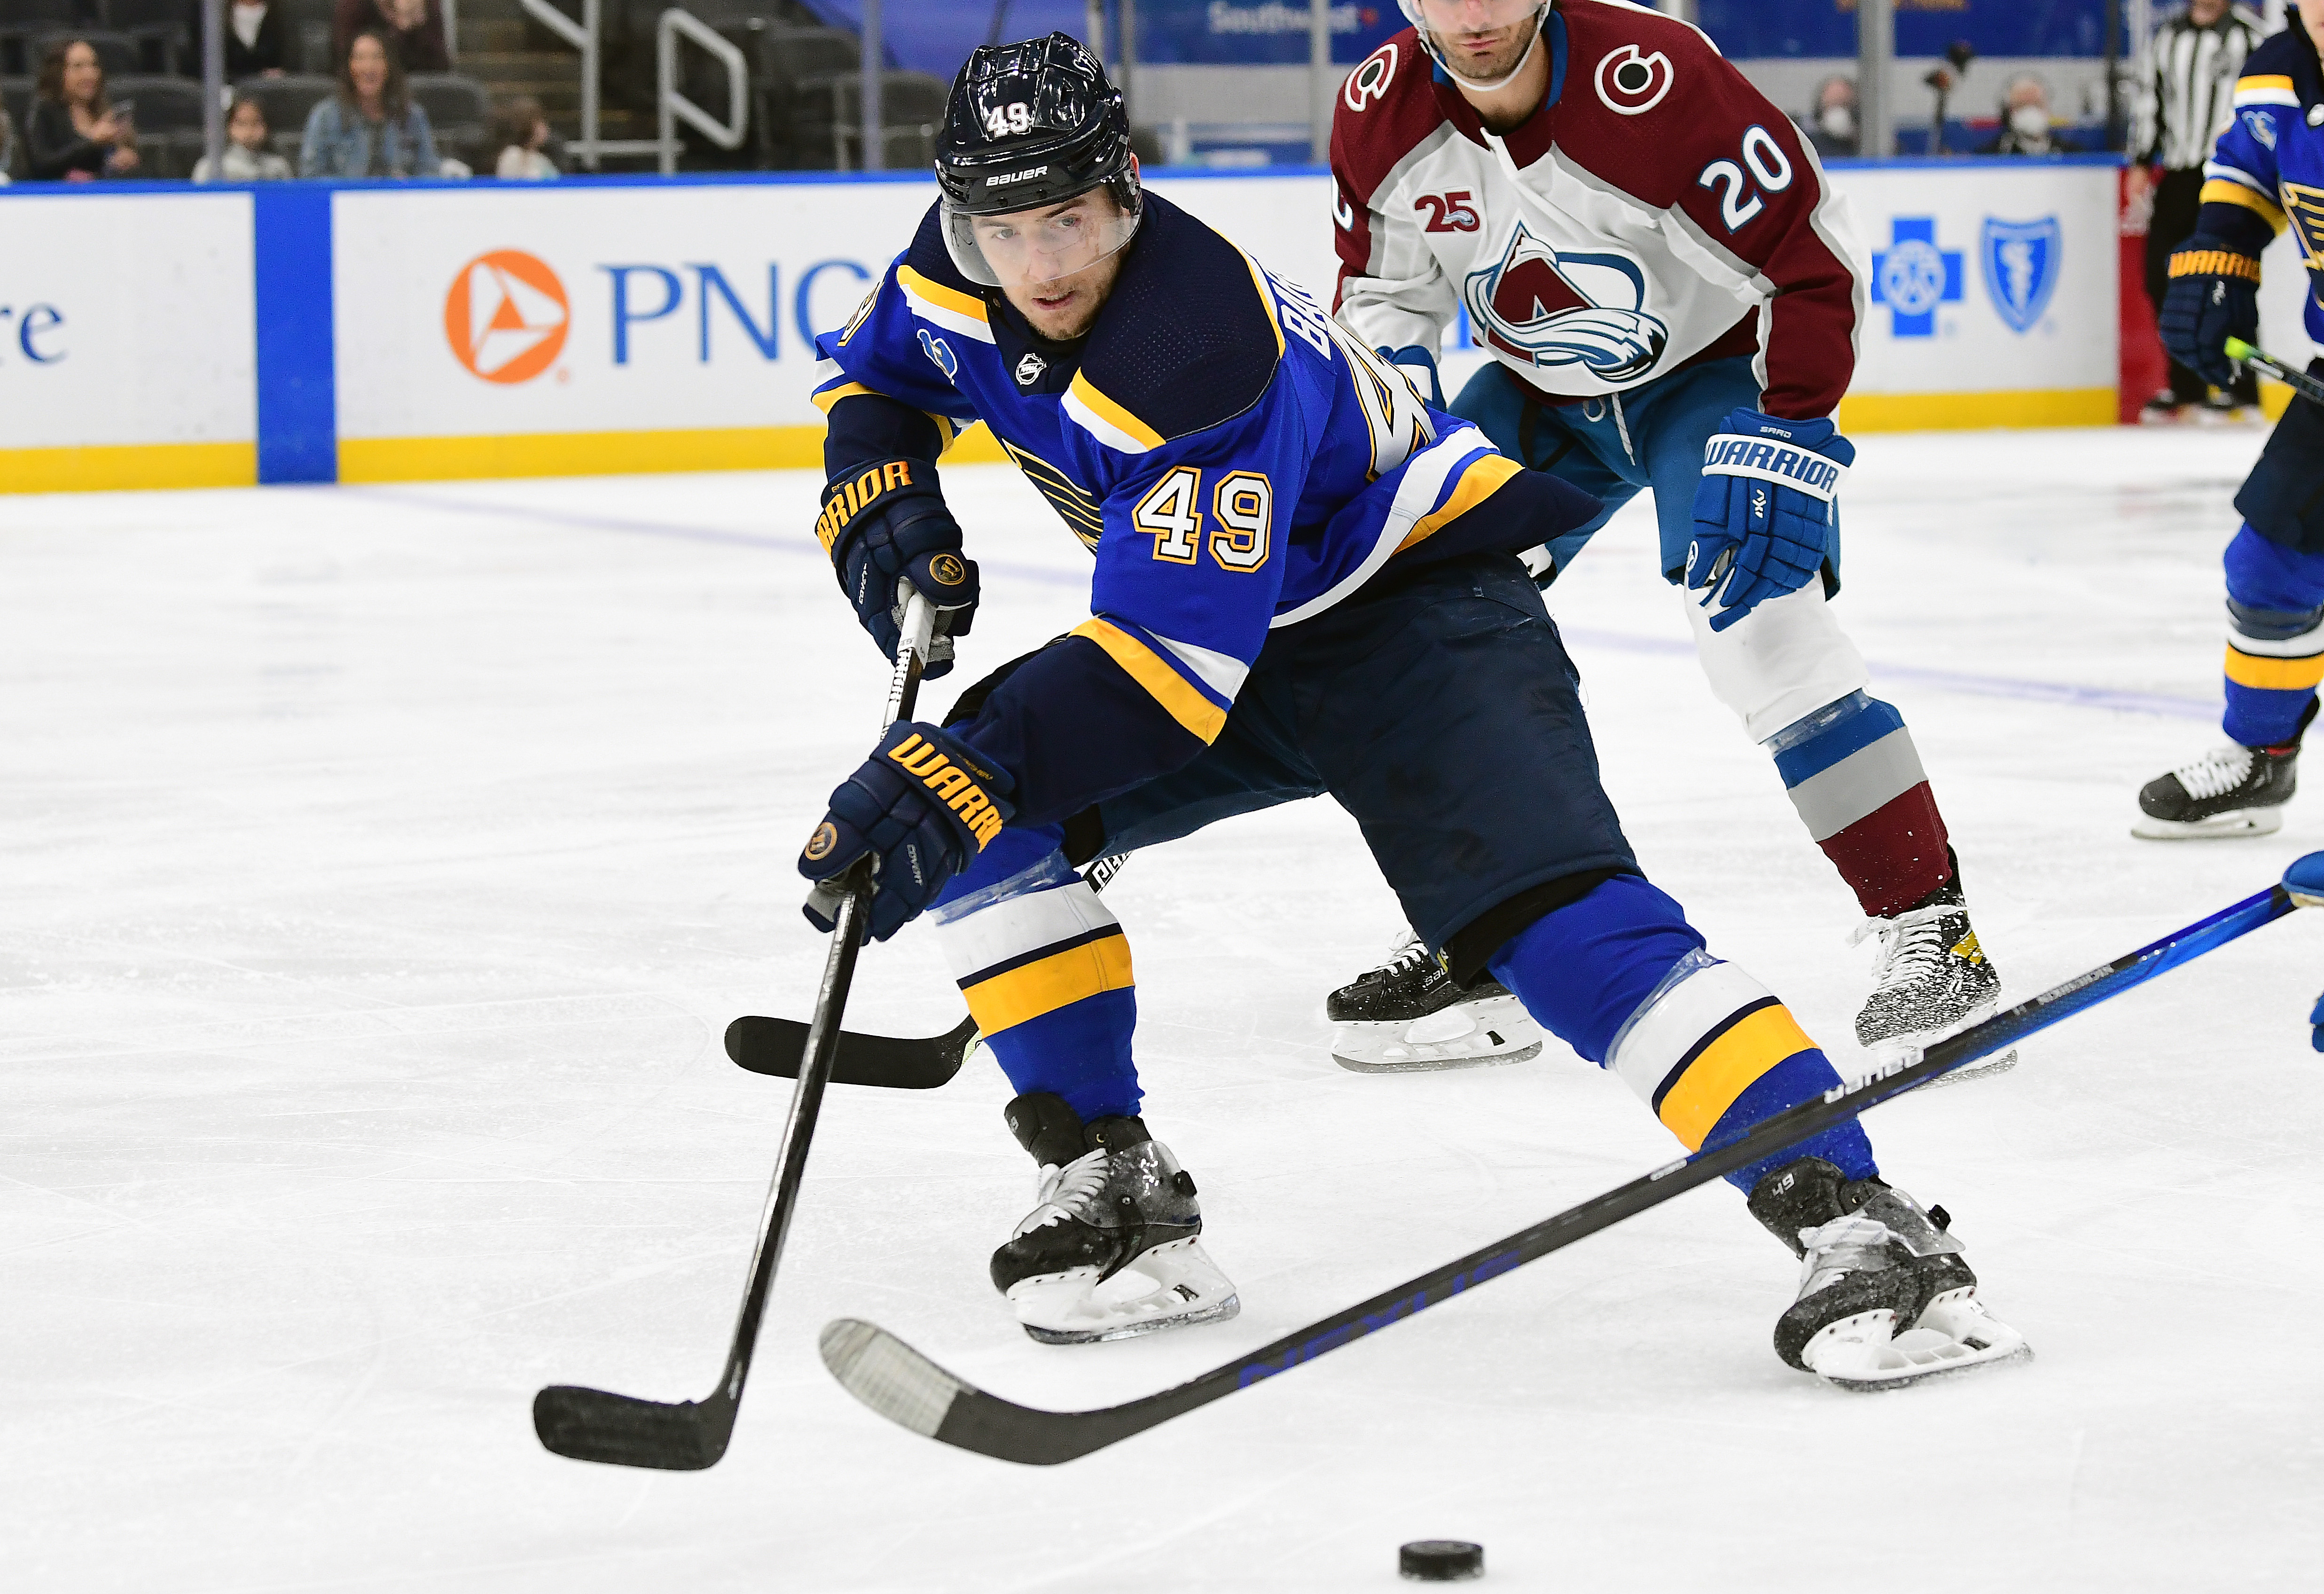 NHL: MAY 23 Stanley Cup Playoffs First Round - Avalanche at Blues